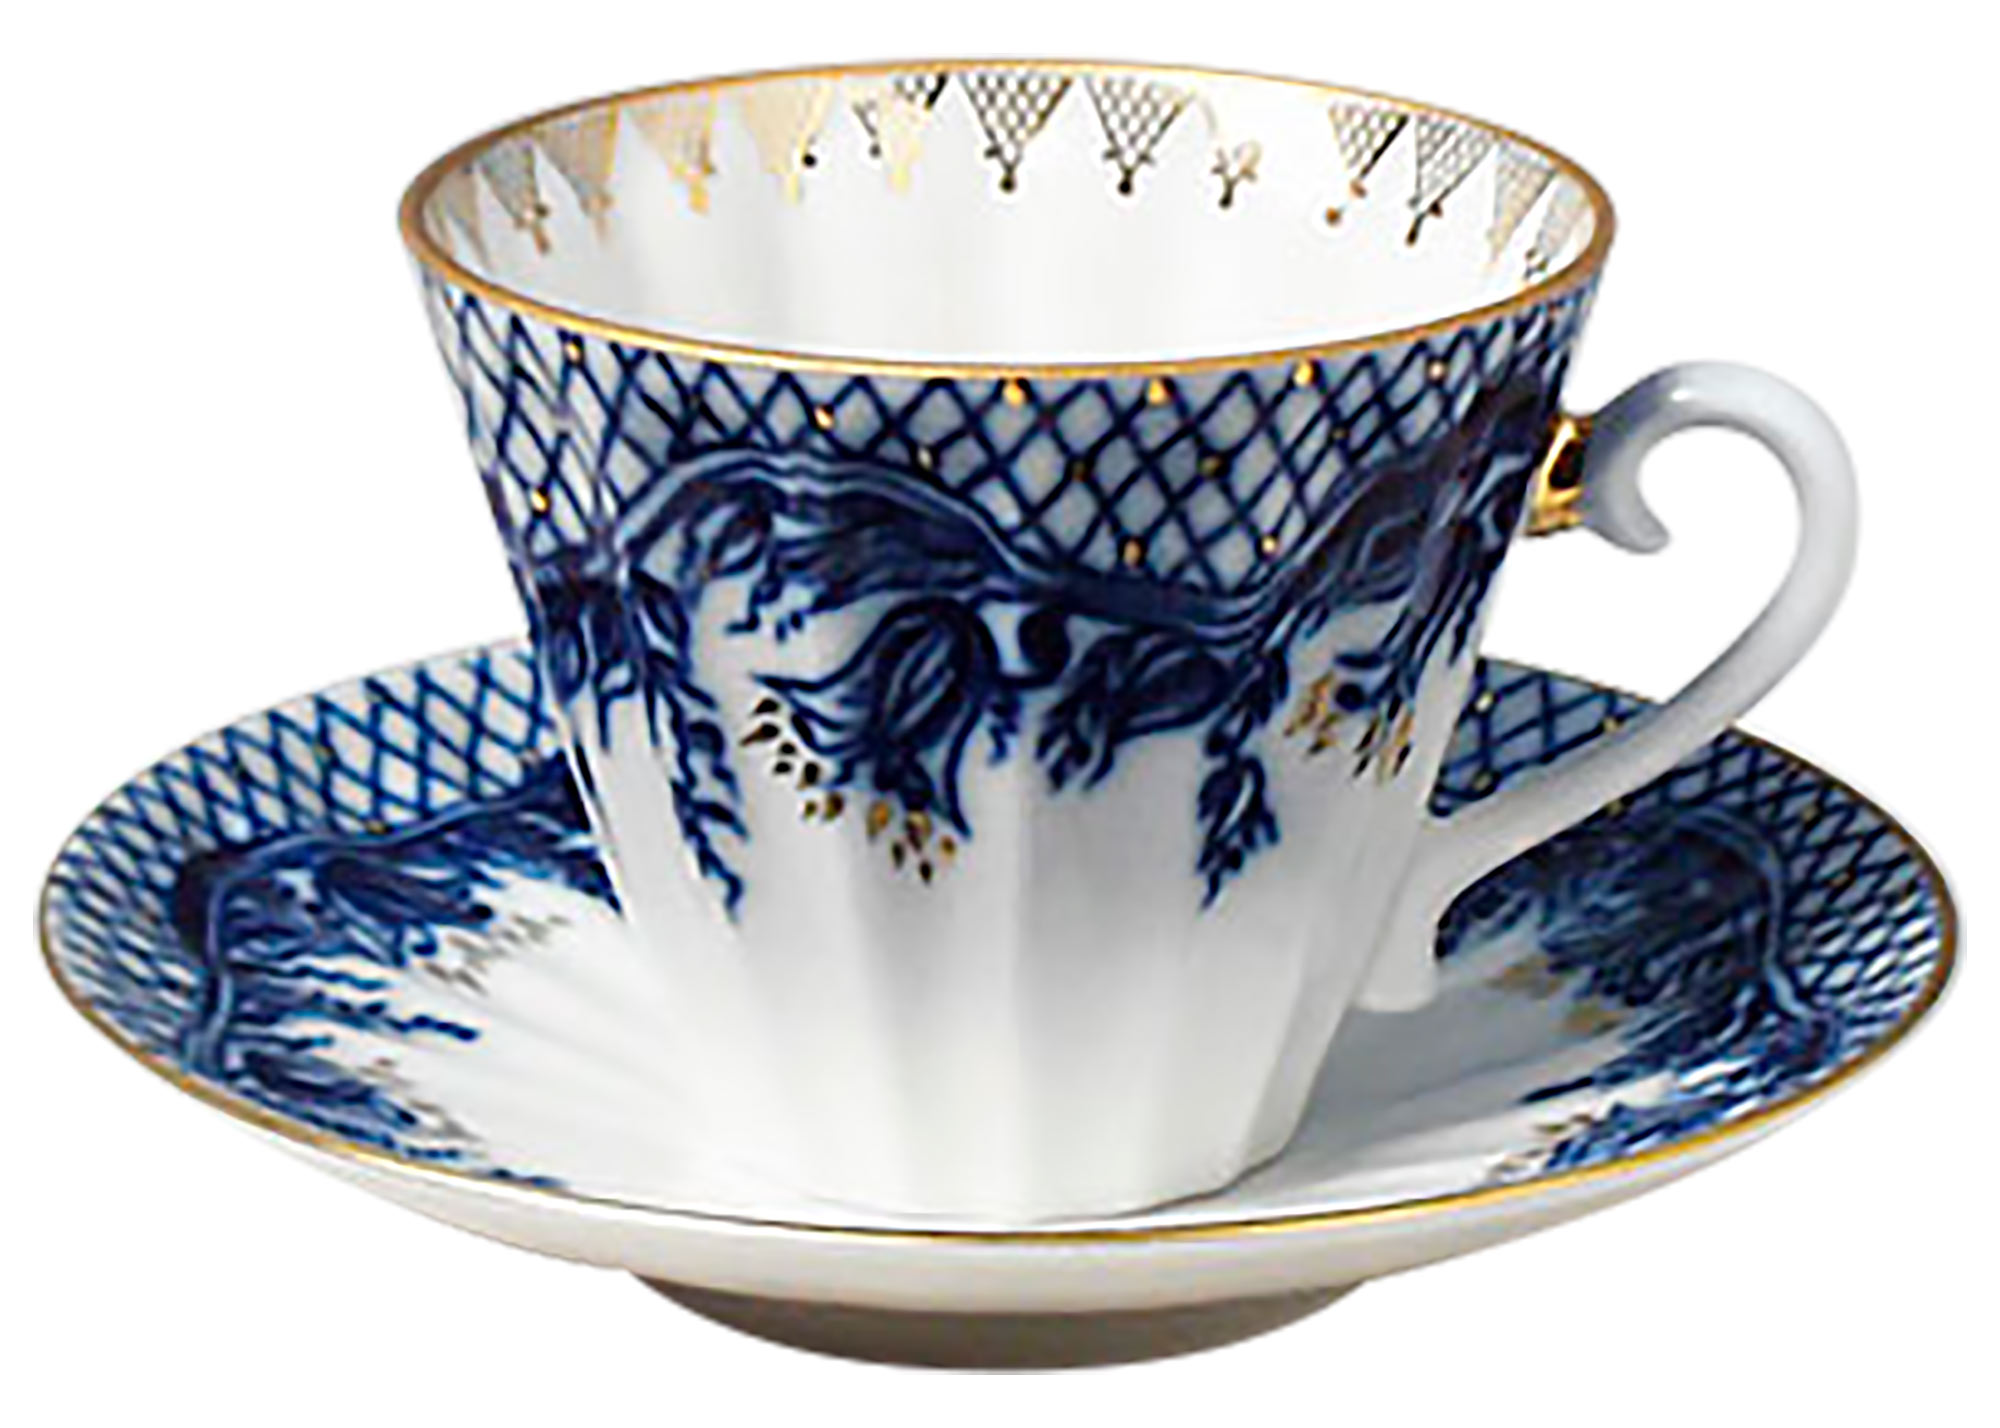 Buy Blue Rhapsody  Cup and Saucer at GoldenCockerel.com